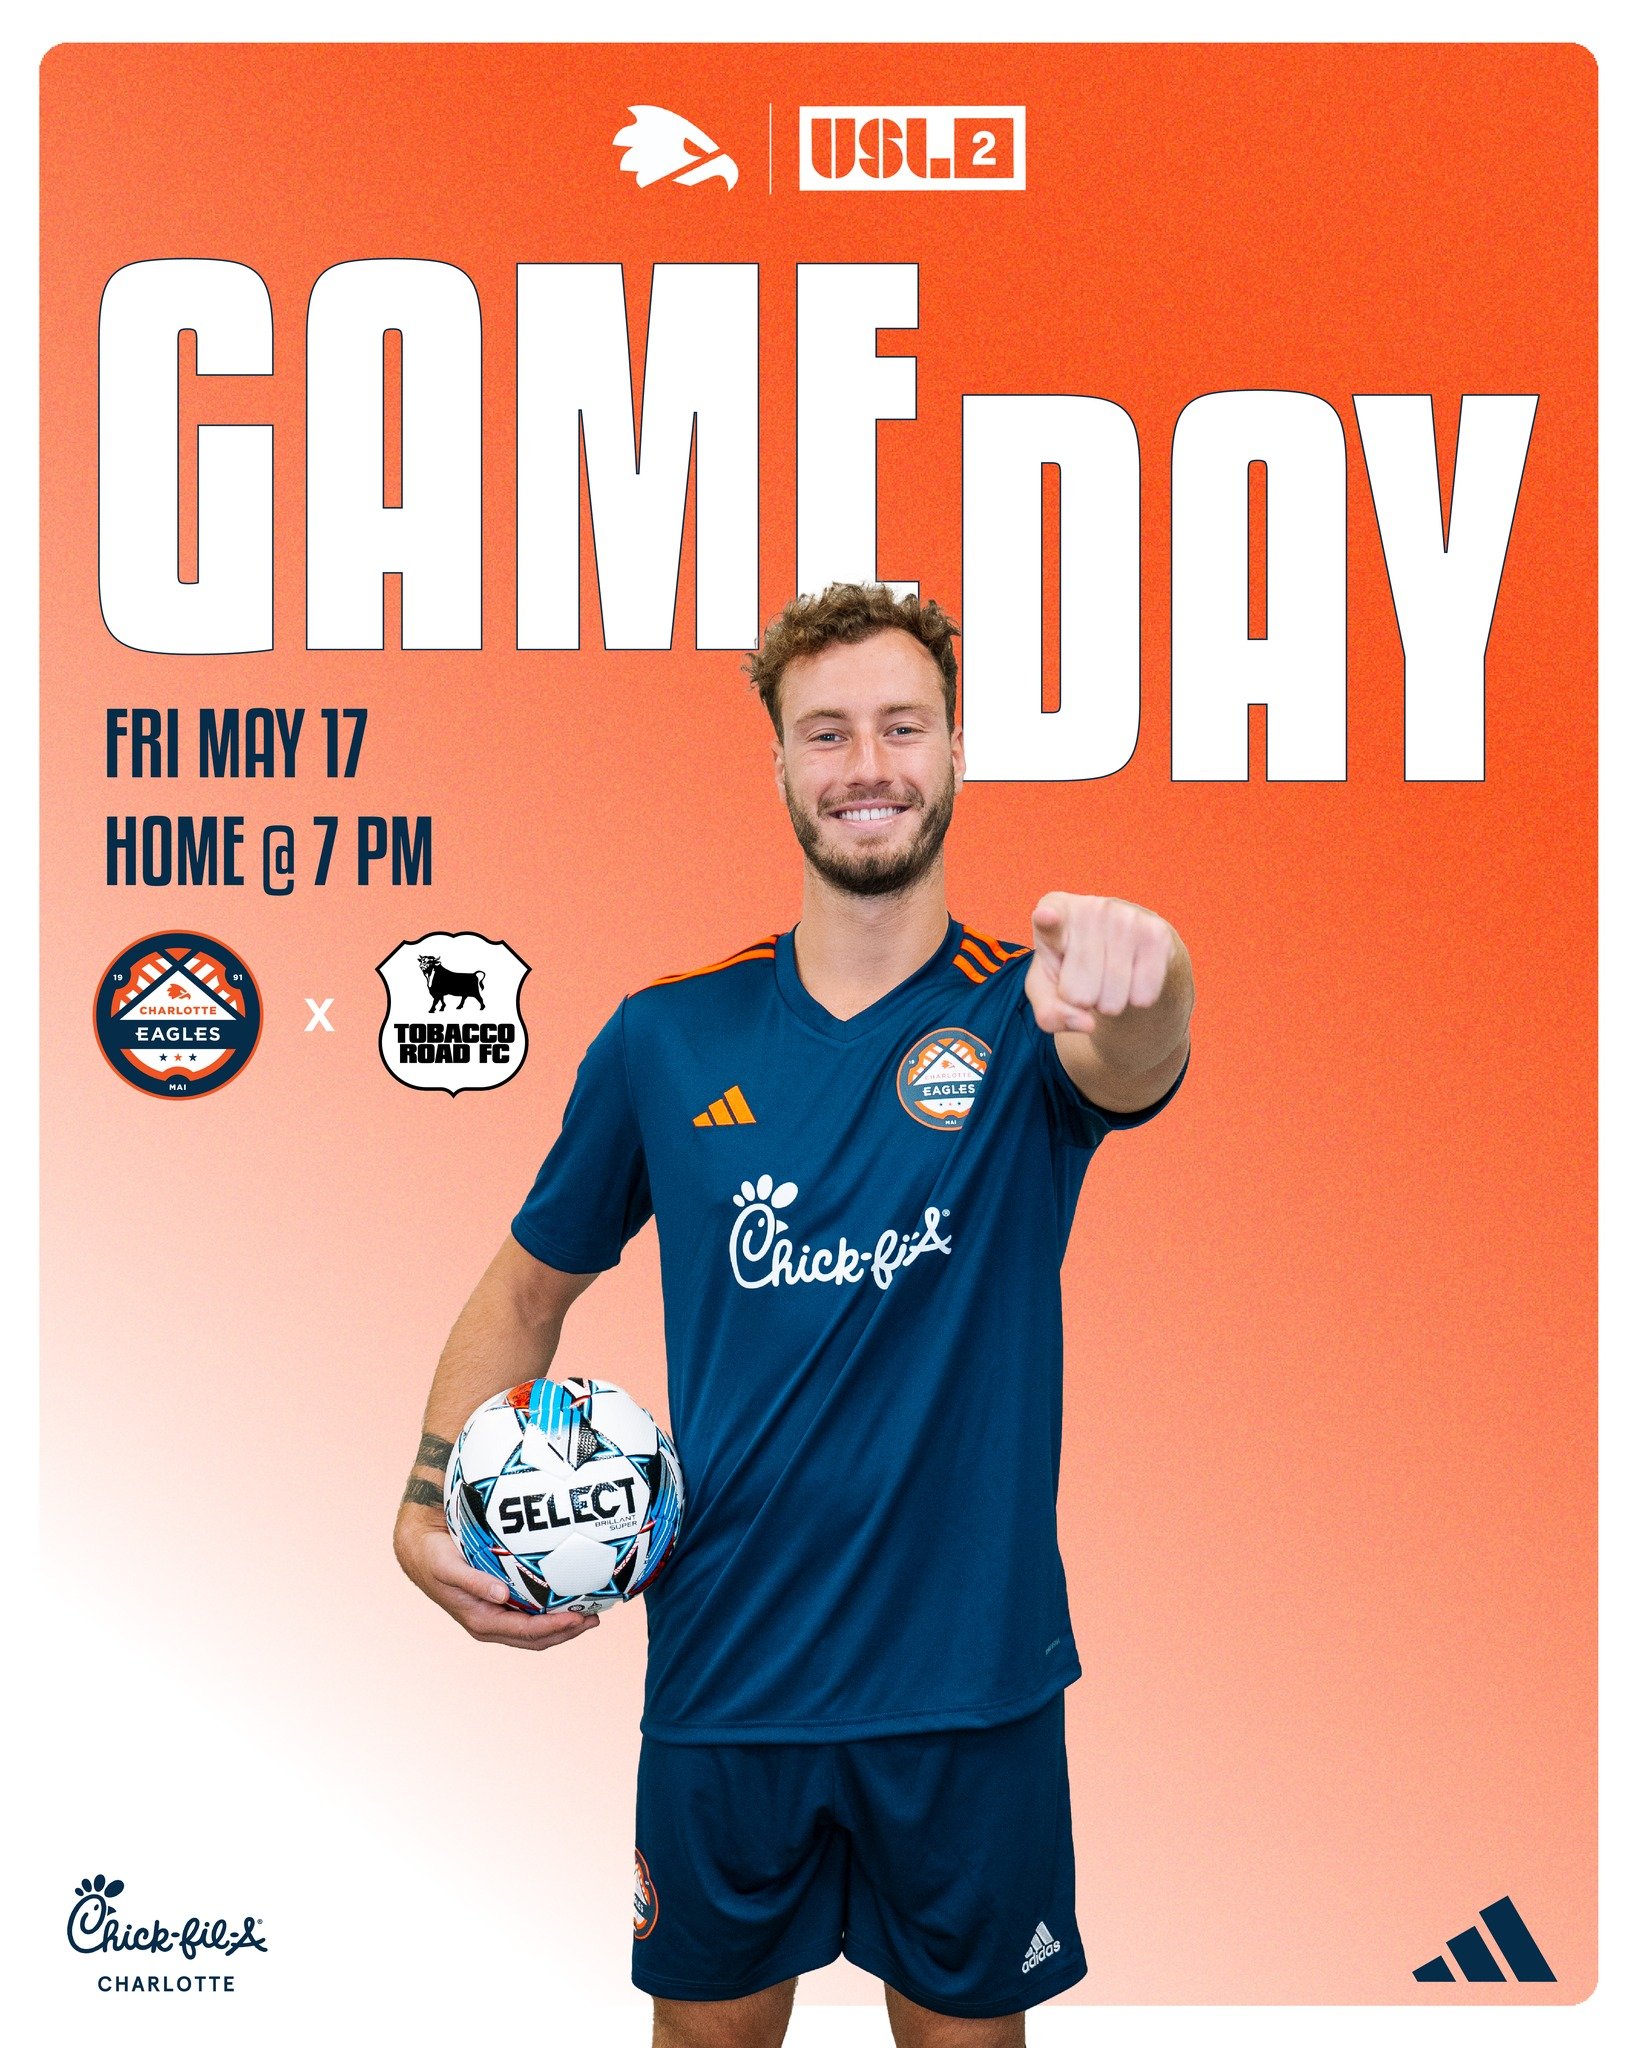 🌟 USL League Two HOME OPENER ➡️ TONIGHT @ 7 PM 🌟

Come out and cheer on the Eagles! You won't want to miss it. 🦅 ⚽

🆚 Tabacco Road FC
⏰ 7:00 PM
📍 HOME - Matthews Sportsplex Field 10 
📱 Livesteam - Link in Bio

#SoliDeoGloria #Path2Pro